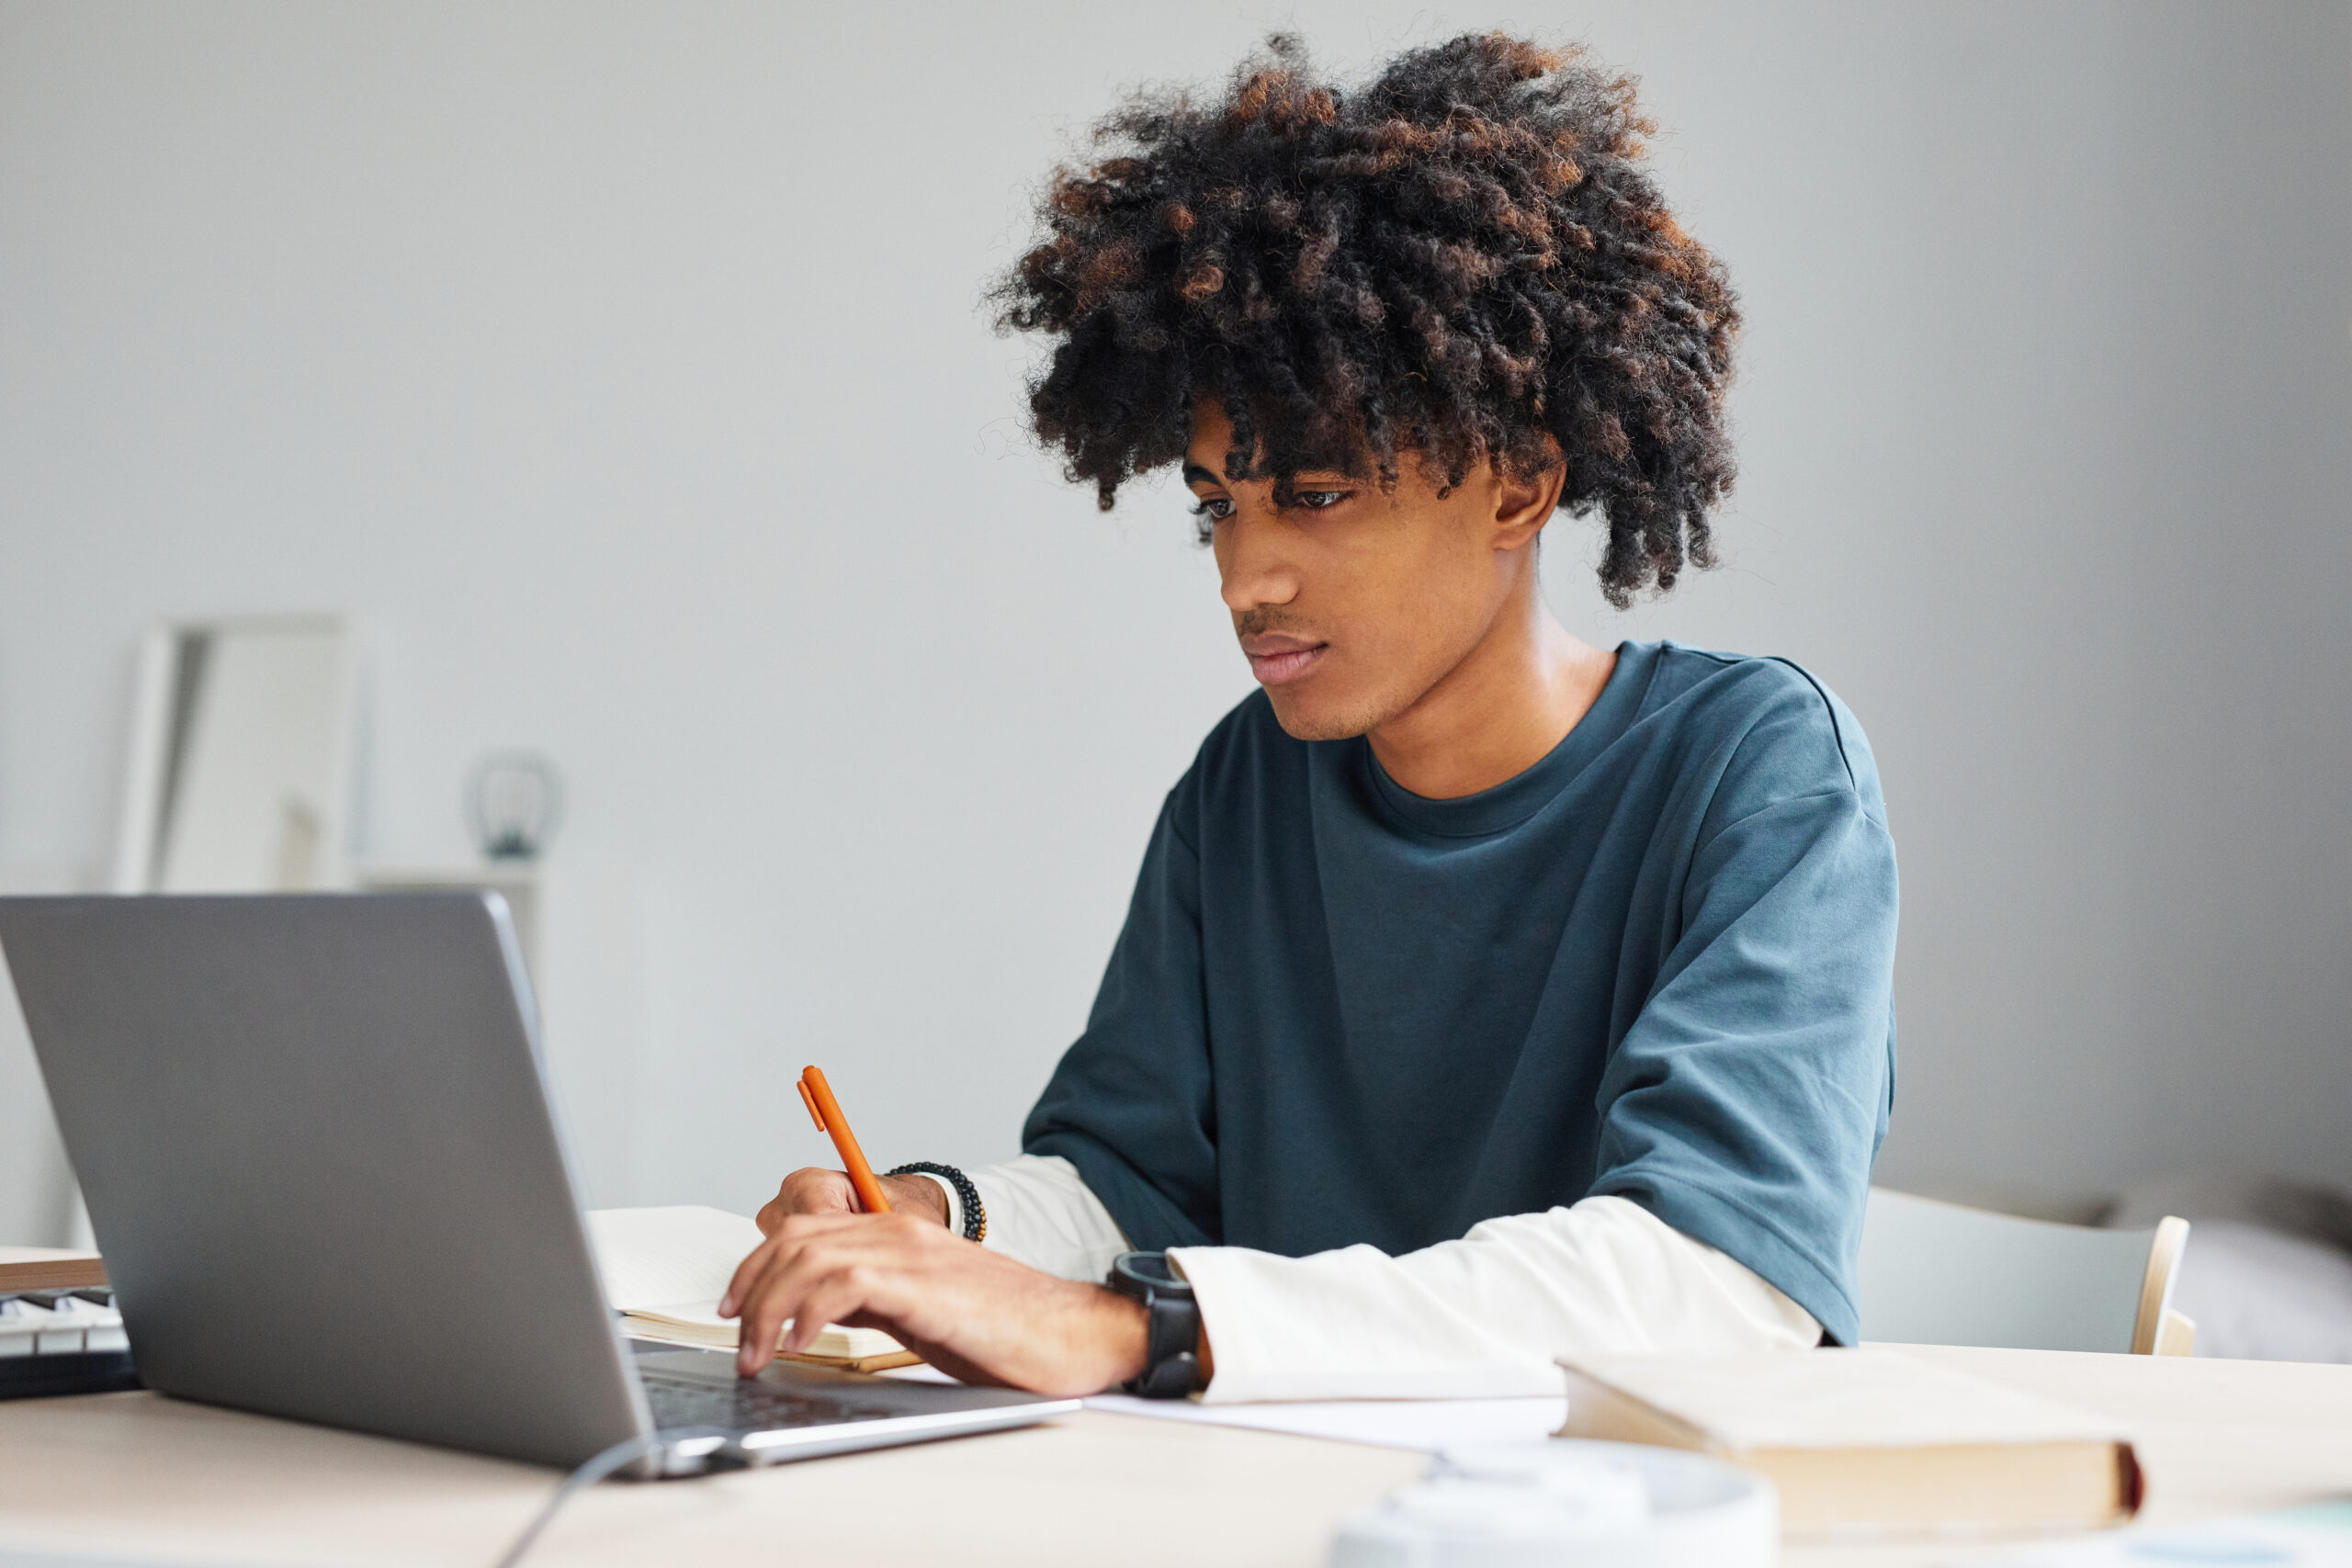 Minimal portrait of African-American teenage boy using laptop while studying at home or in college, copy space